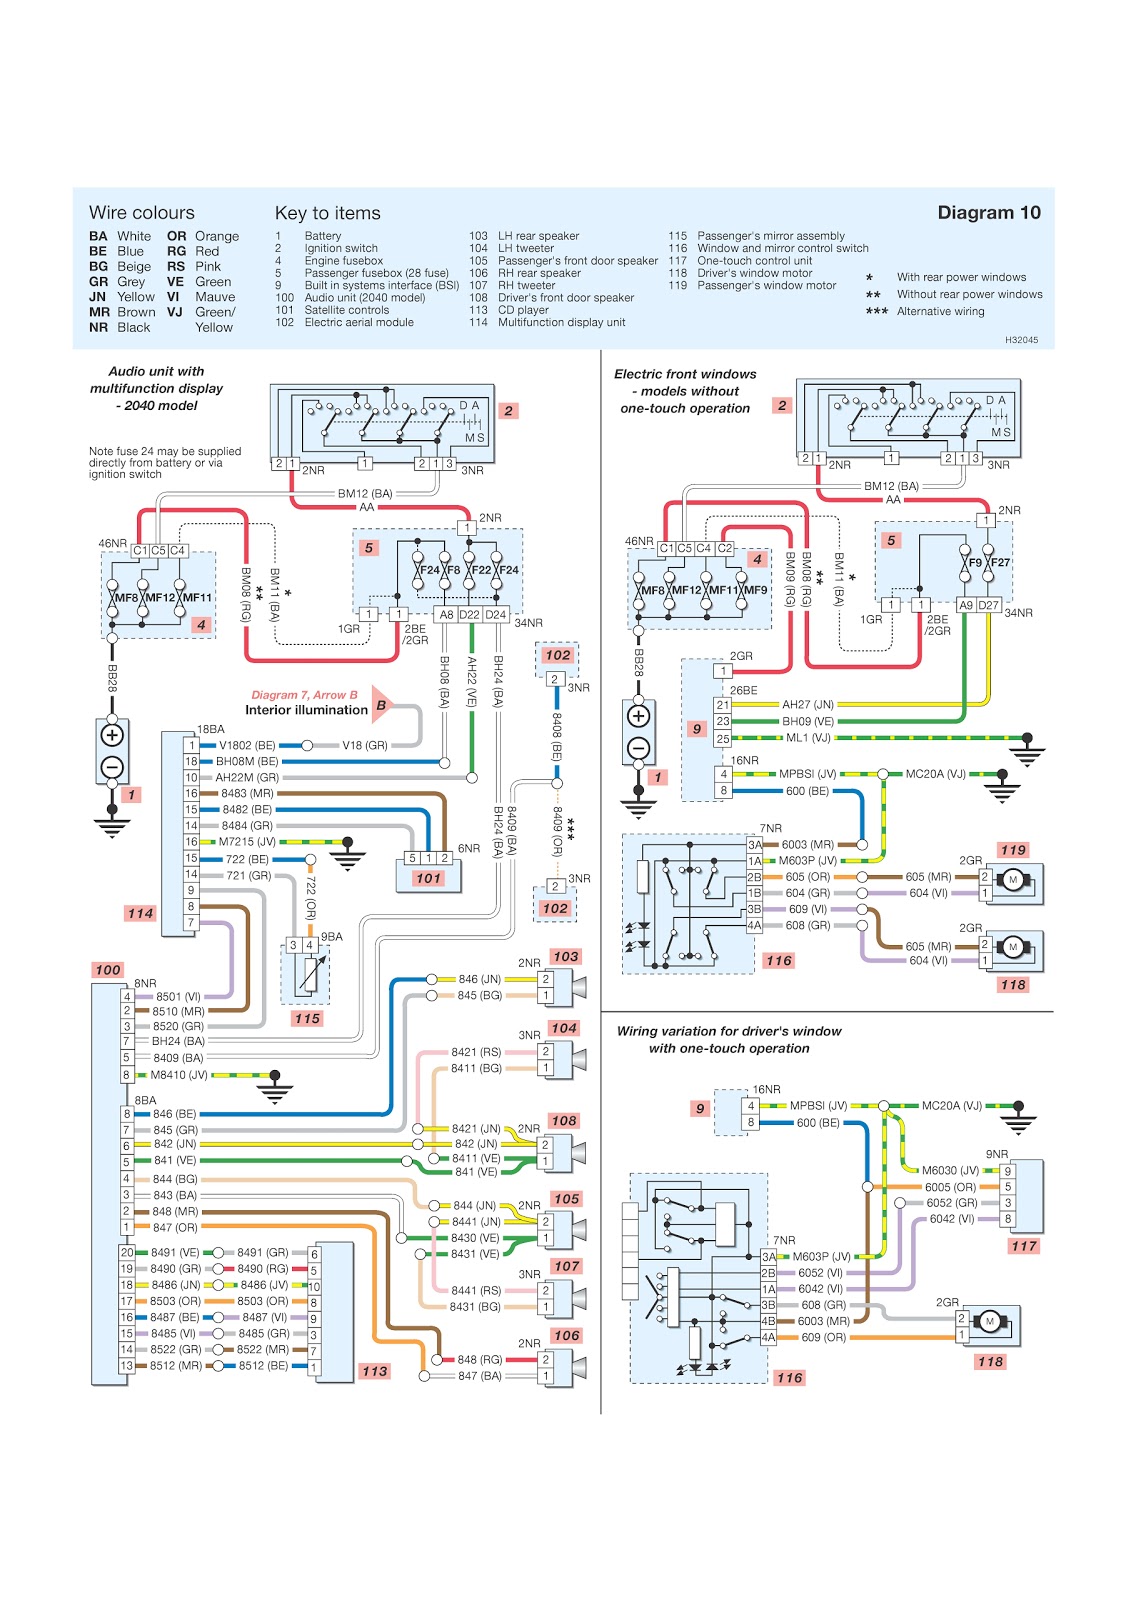 Peugeot 206 Schematic Wiring Diagrams Audio System, Electric Windows